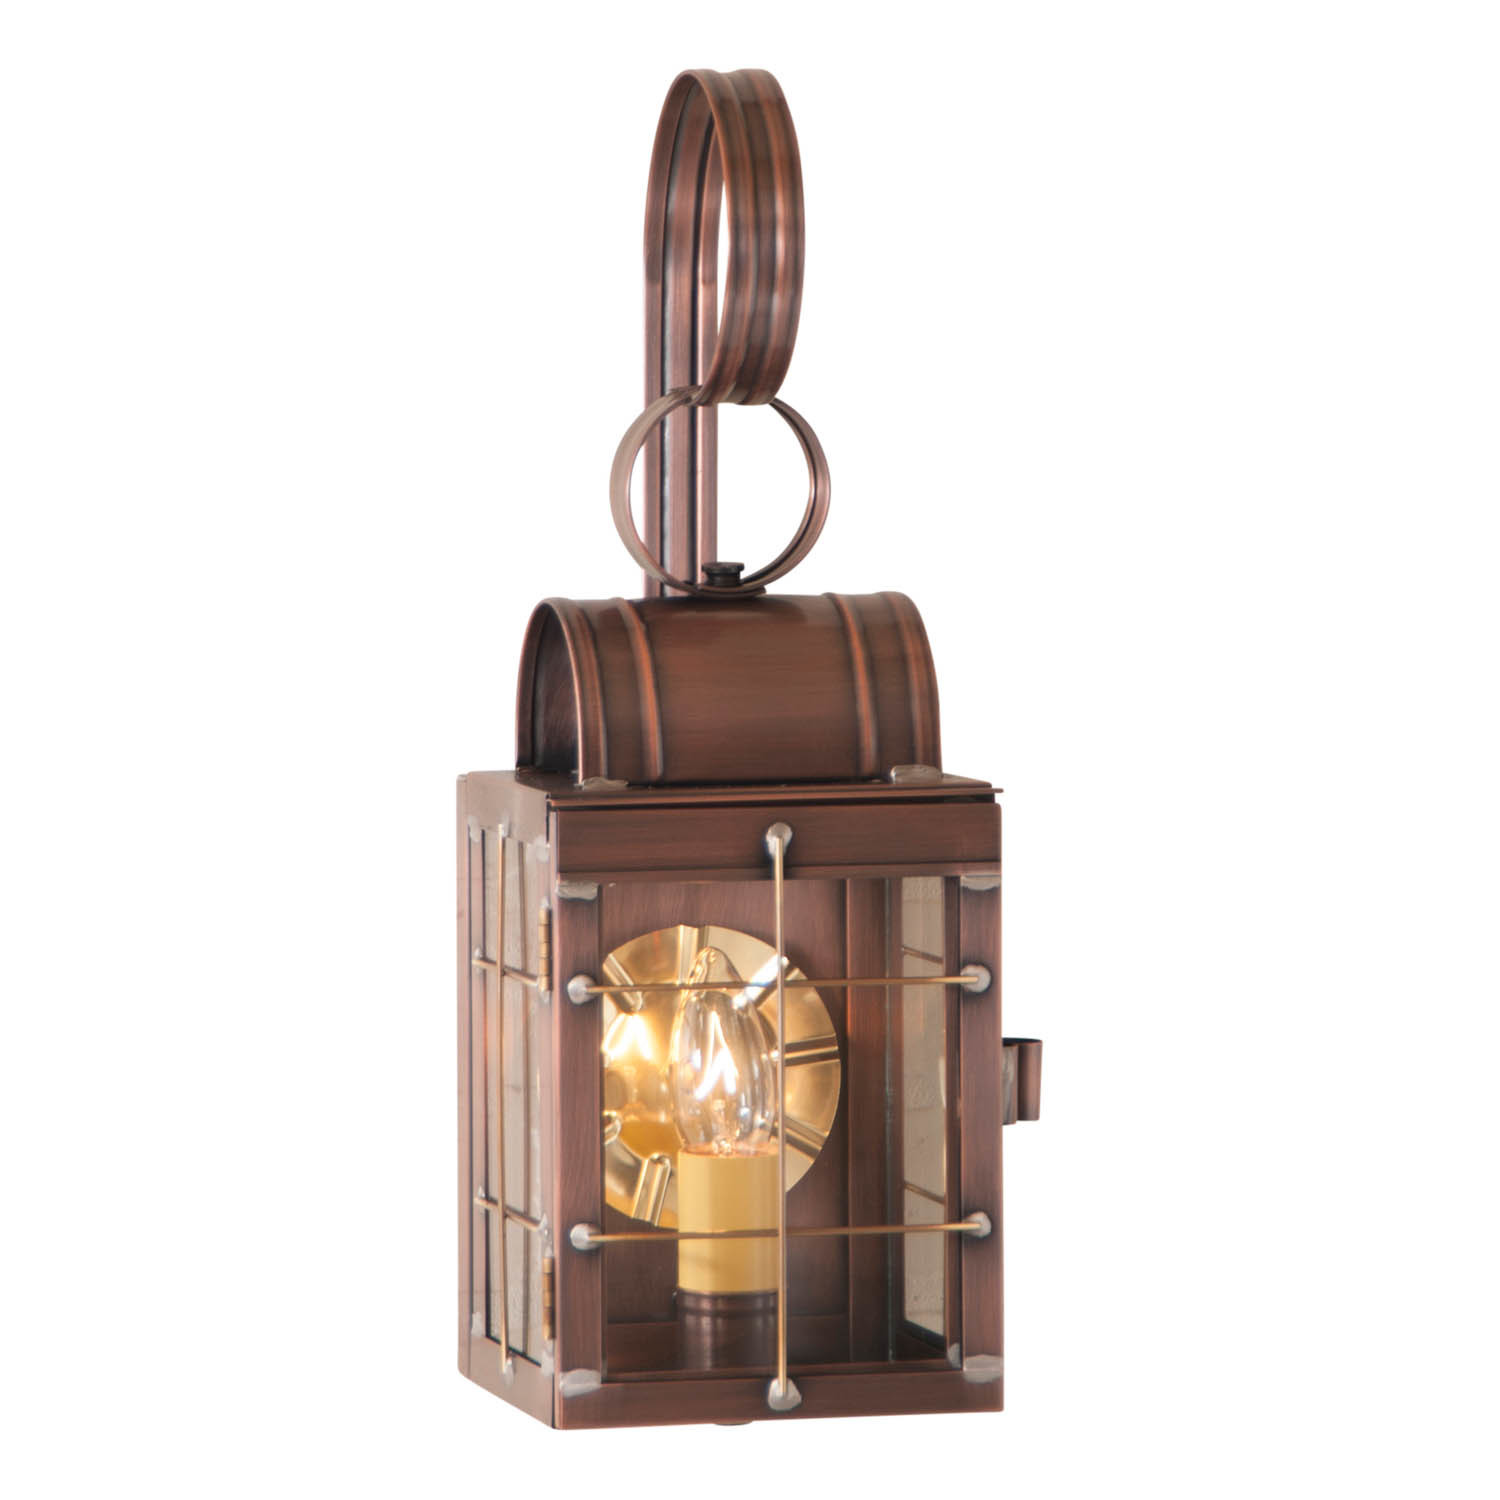 Irvin's Country Tinware Single Wall Lantern in Antique Copper - $257.35